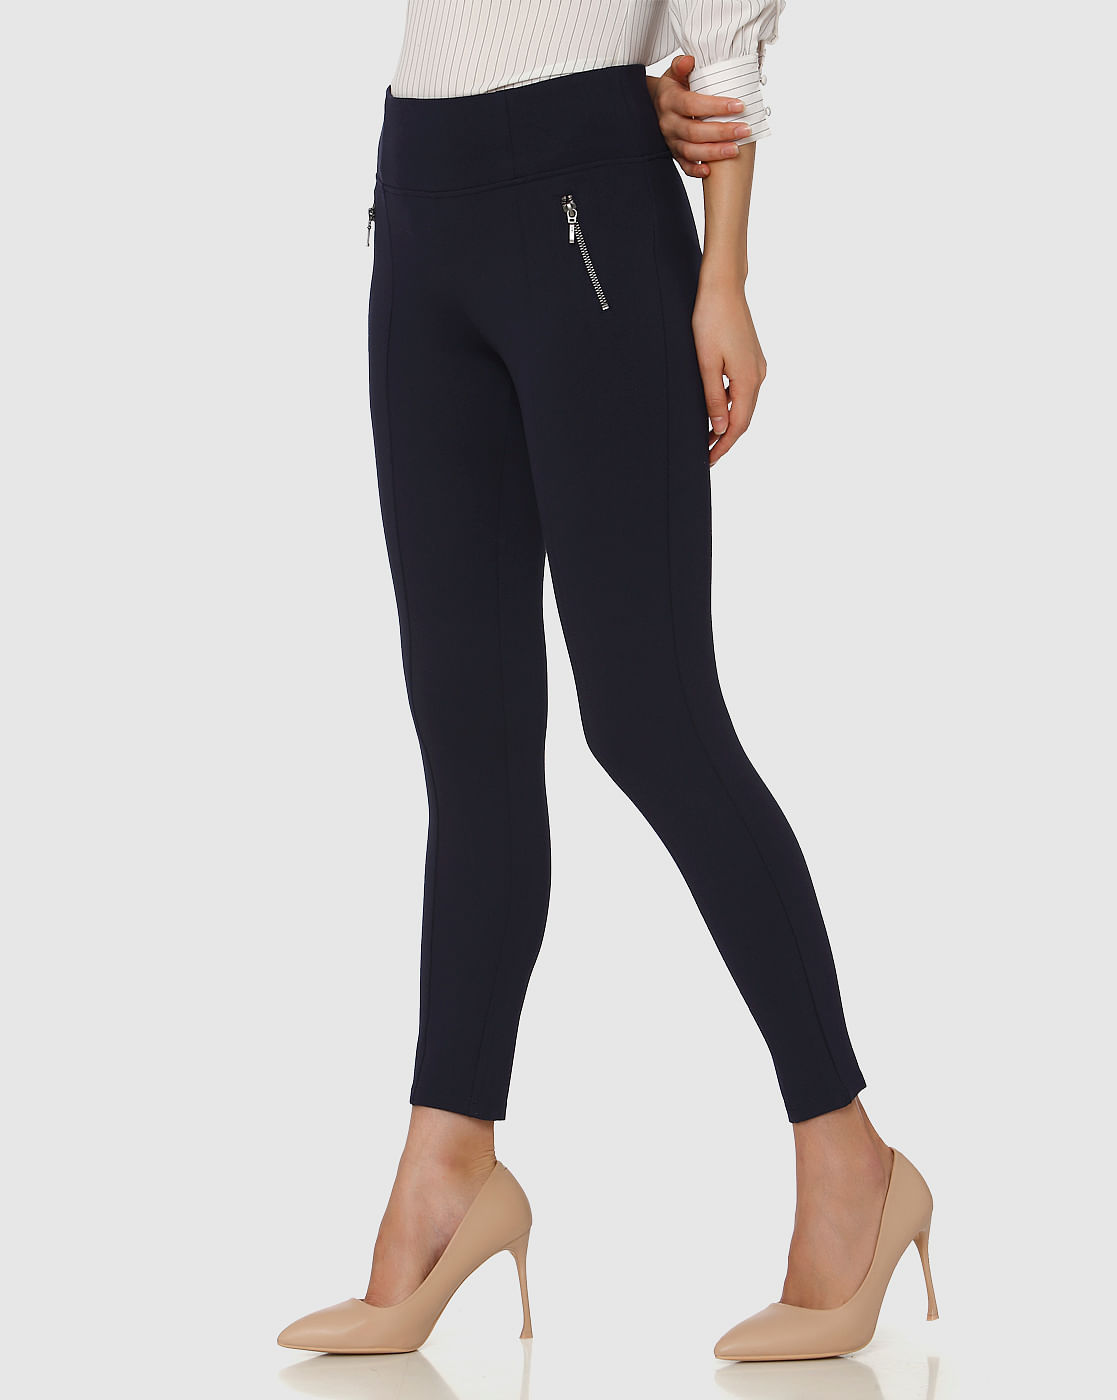 Buy Accurate Fashion Women's Straight Fit Leggings (ACC-070_Grey,  Black_Free Size) at Amazon.in